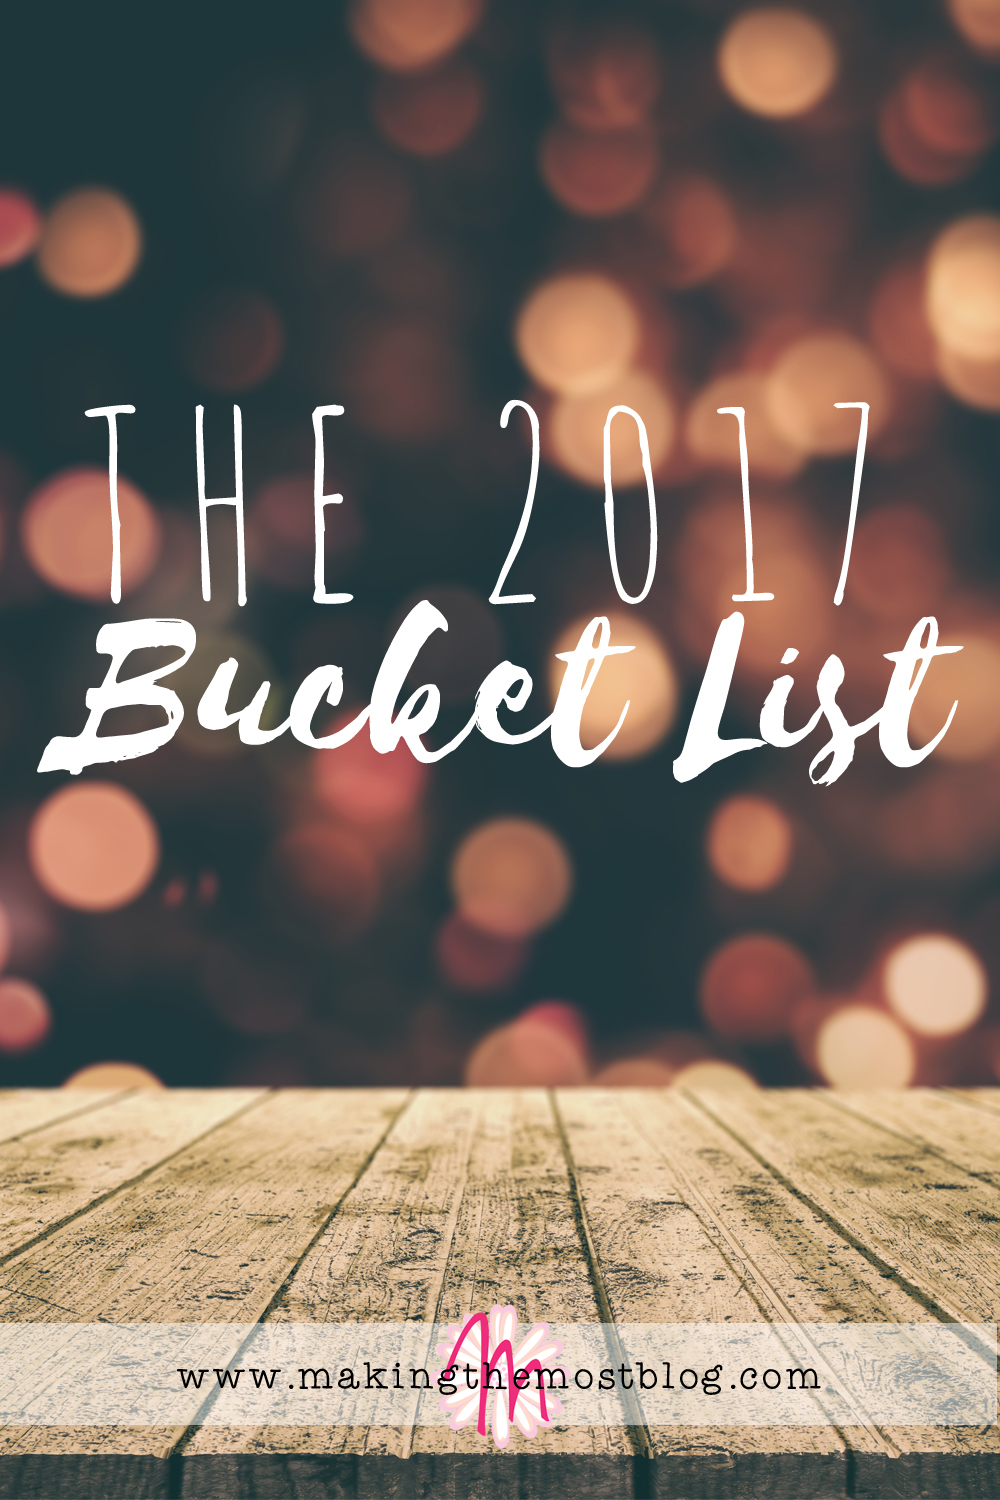 The 2017 Bucket List | Making the Most Blog